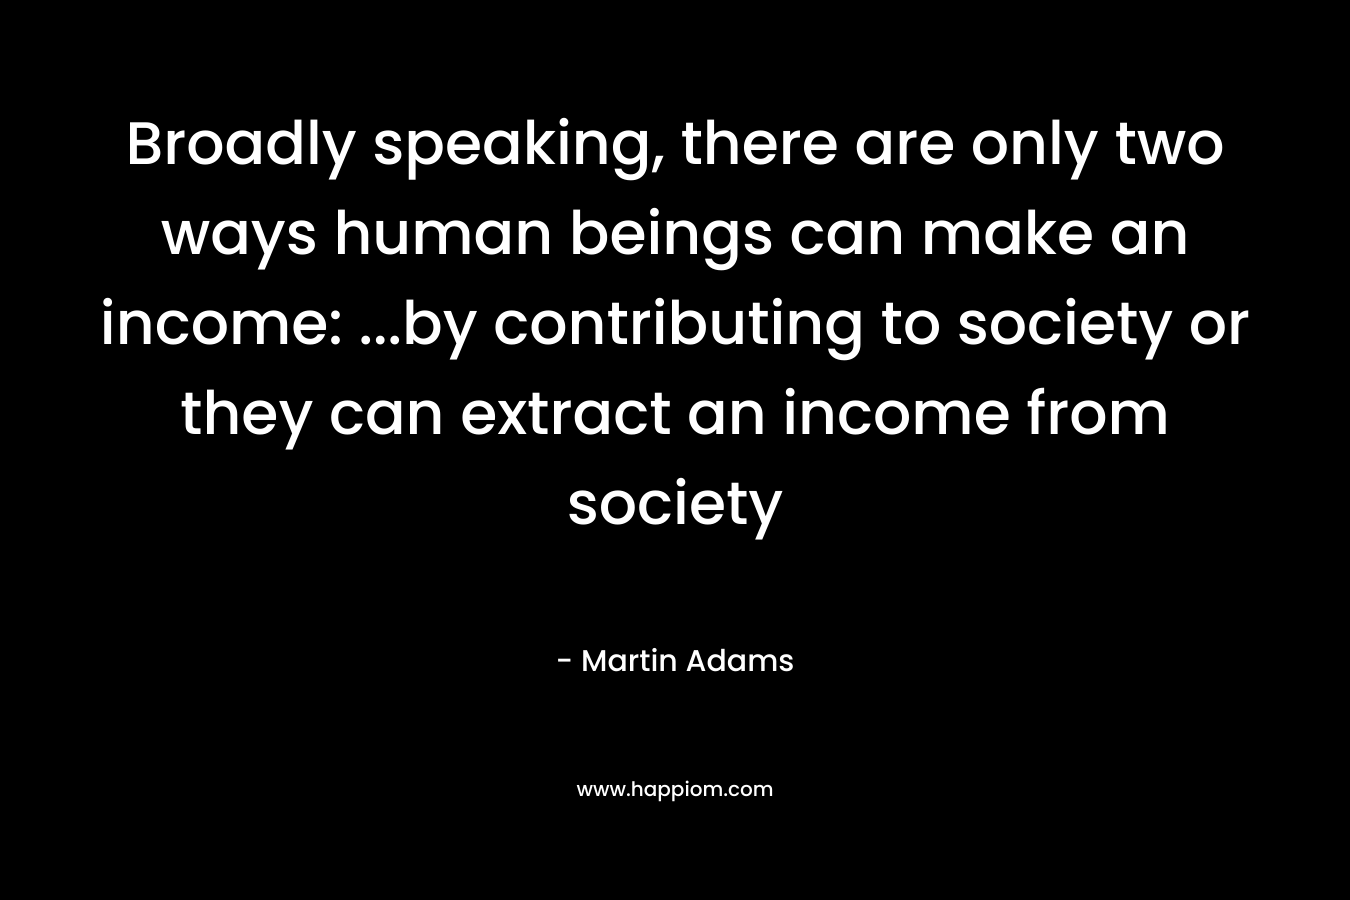 Broadly speaking, there are only two ways human beings can make an income: …by contributing to society or they can extract an income from society – Martin Adams